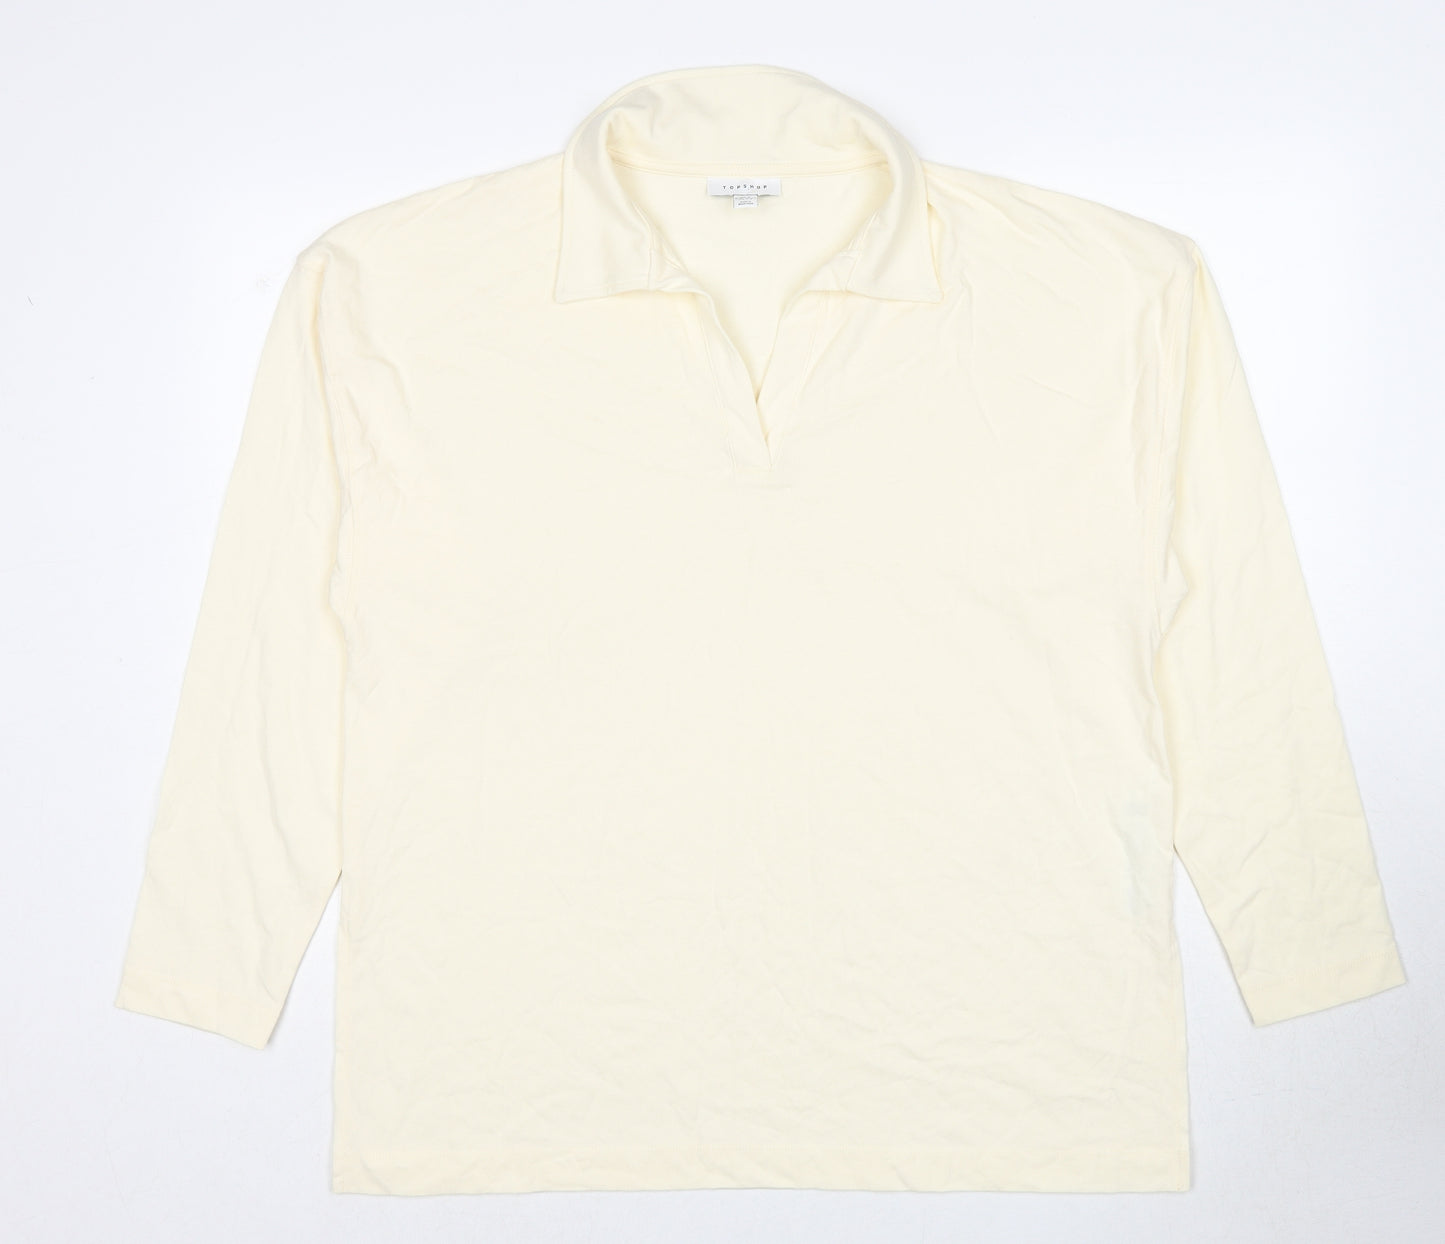 Topshop Womens Yellow Cotton Pullover Sweatshirt Size 8 Pullover - Size 8-10